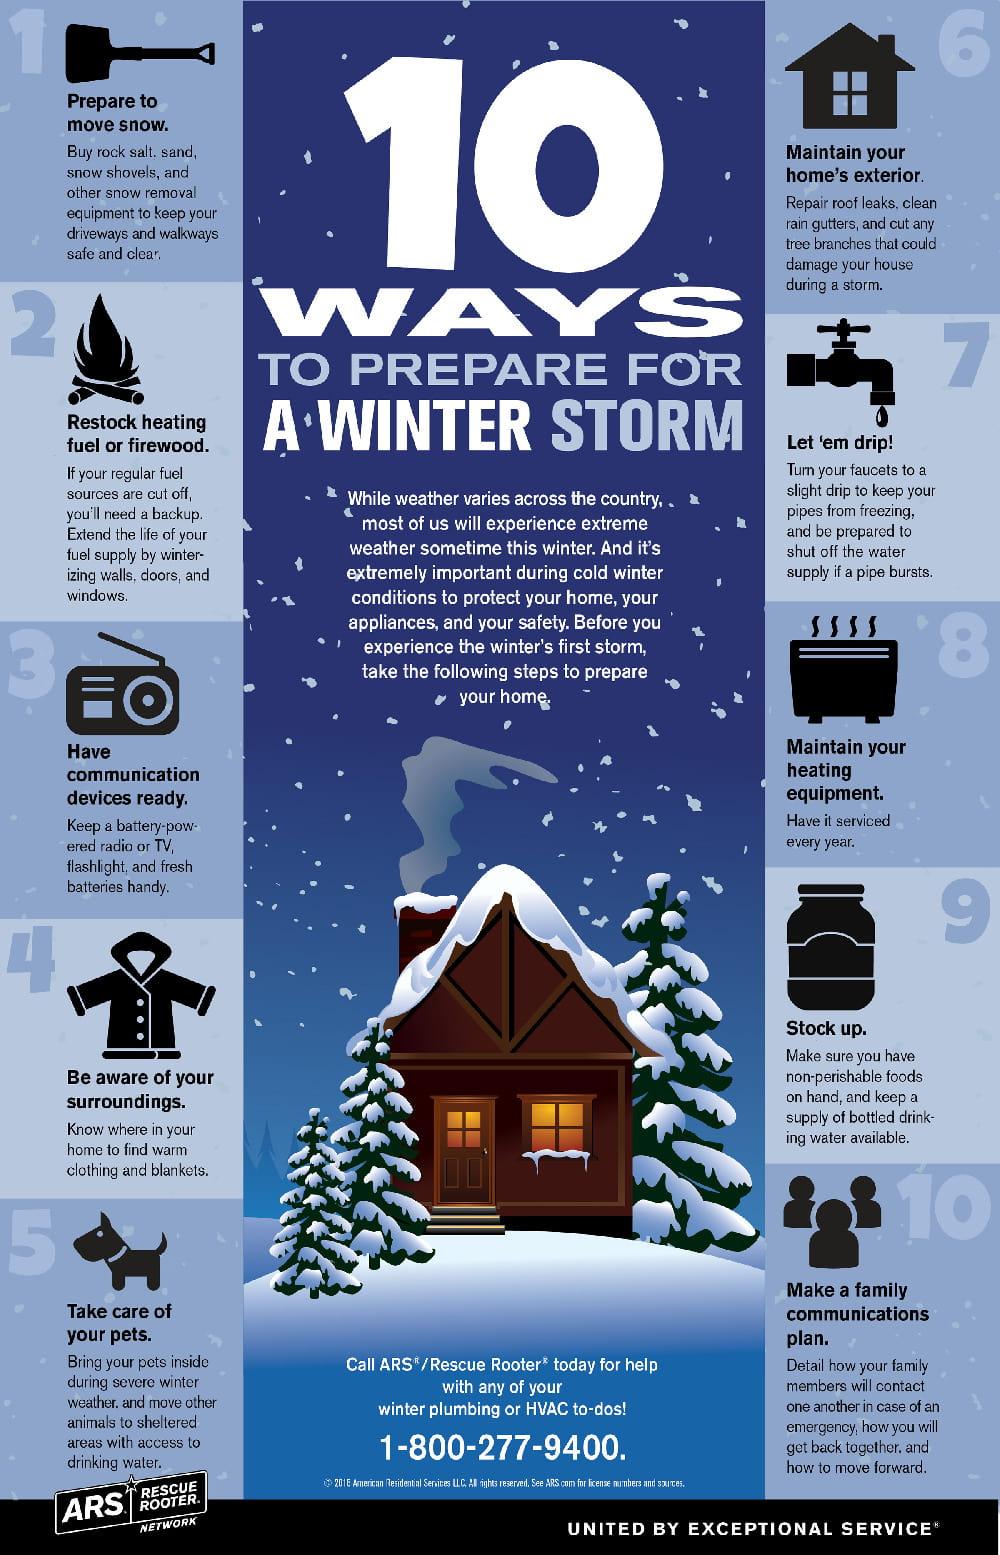 How to prepare your home, plan for travel ahead of snow and freezing temps 